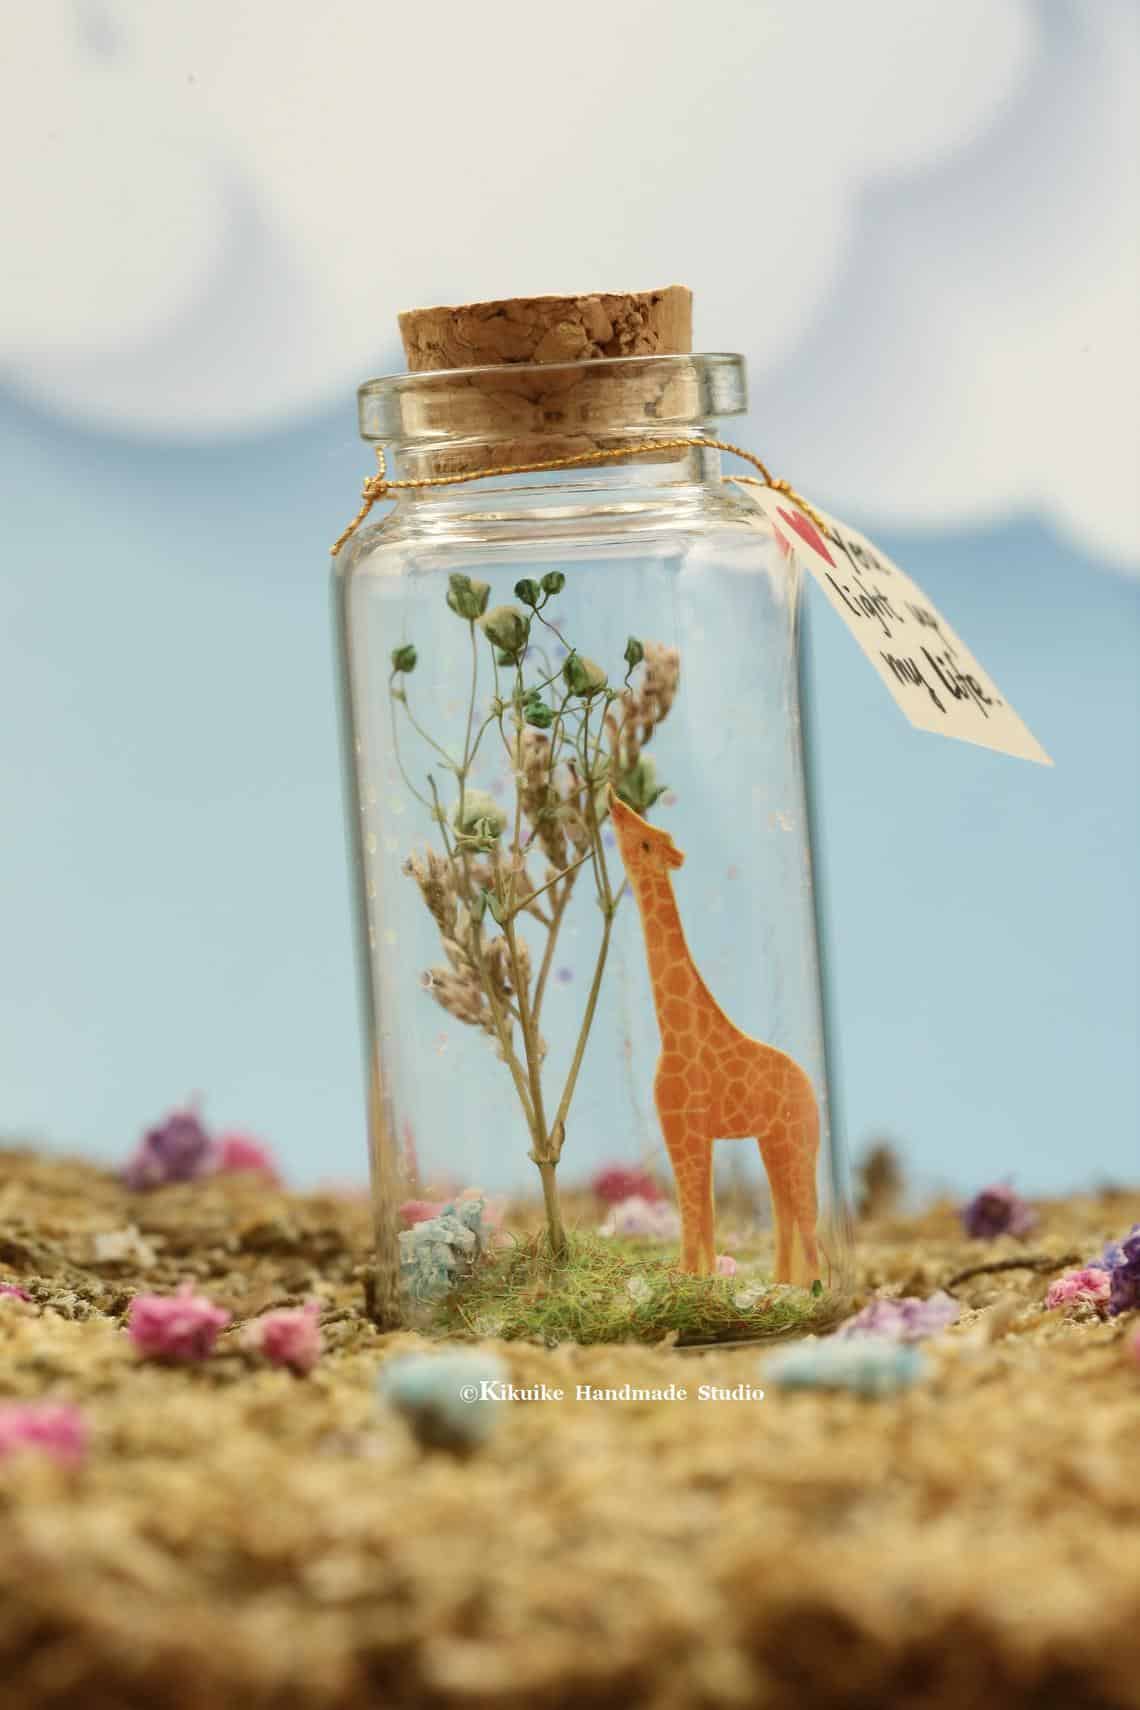 Tiny and Cute Giraffe Message Bottle